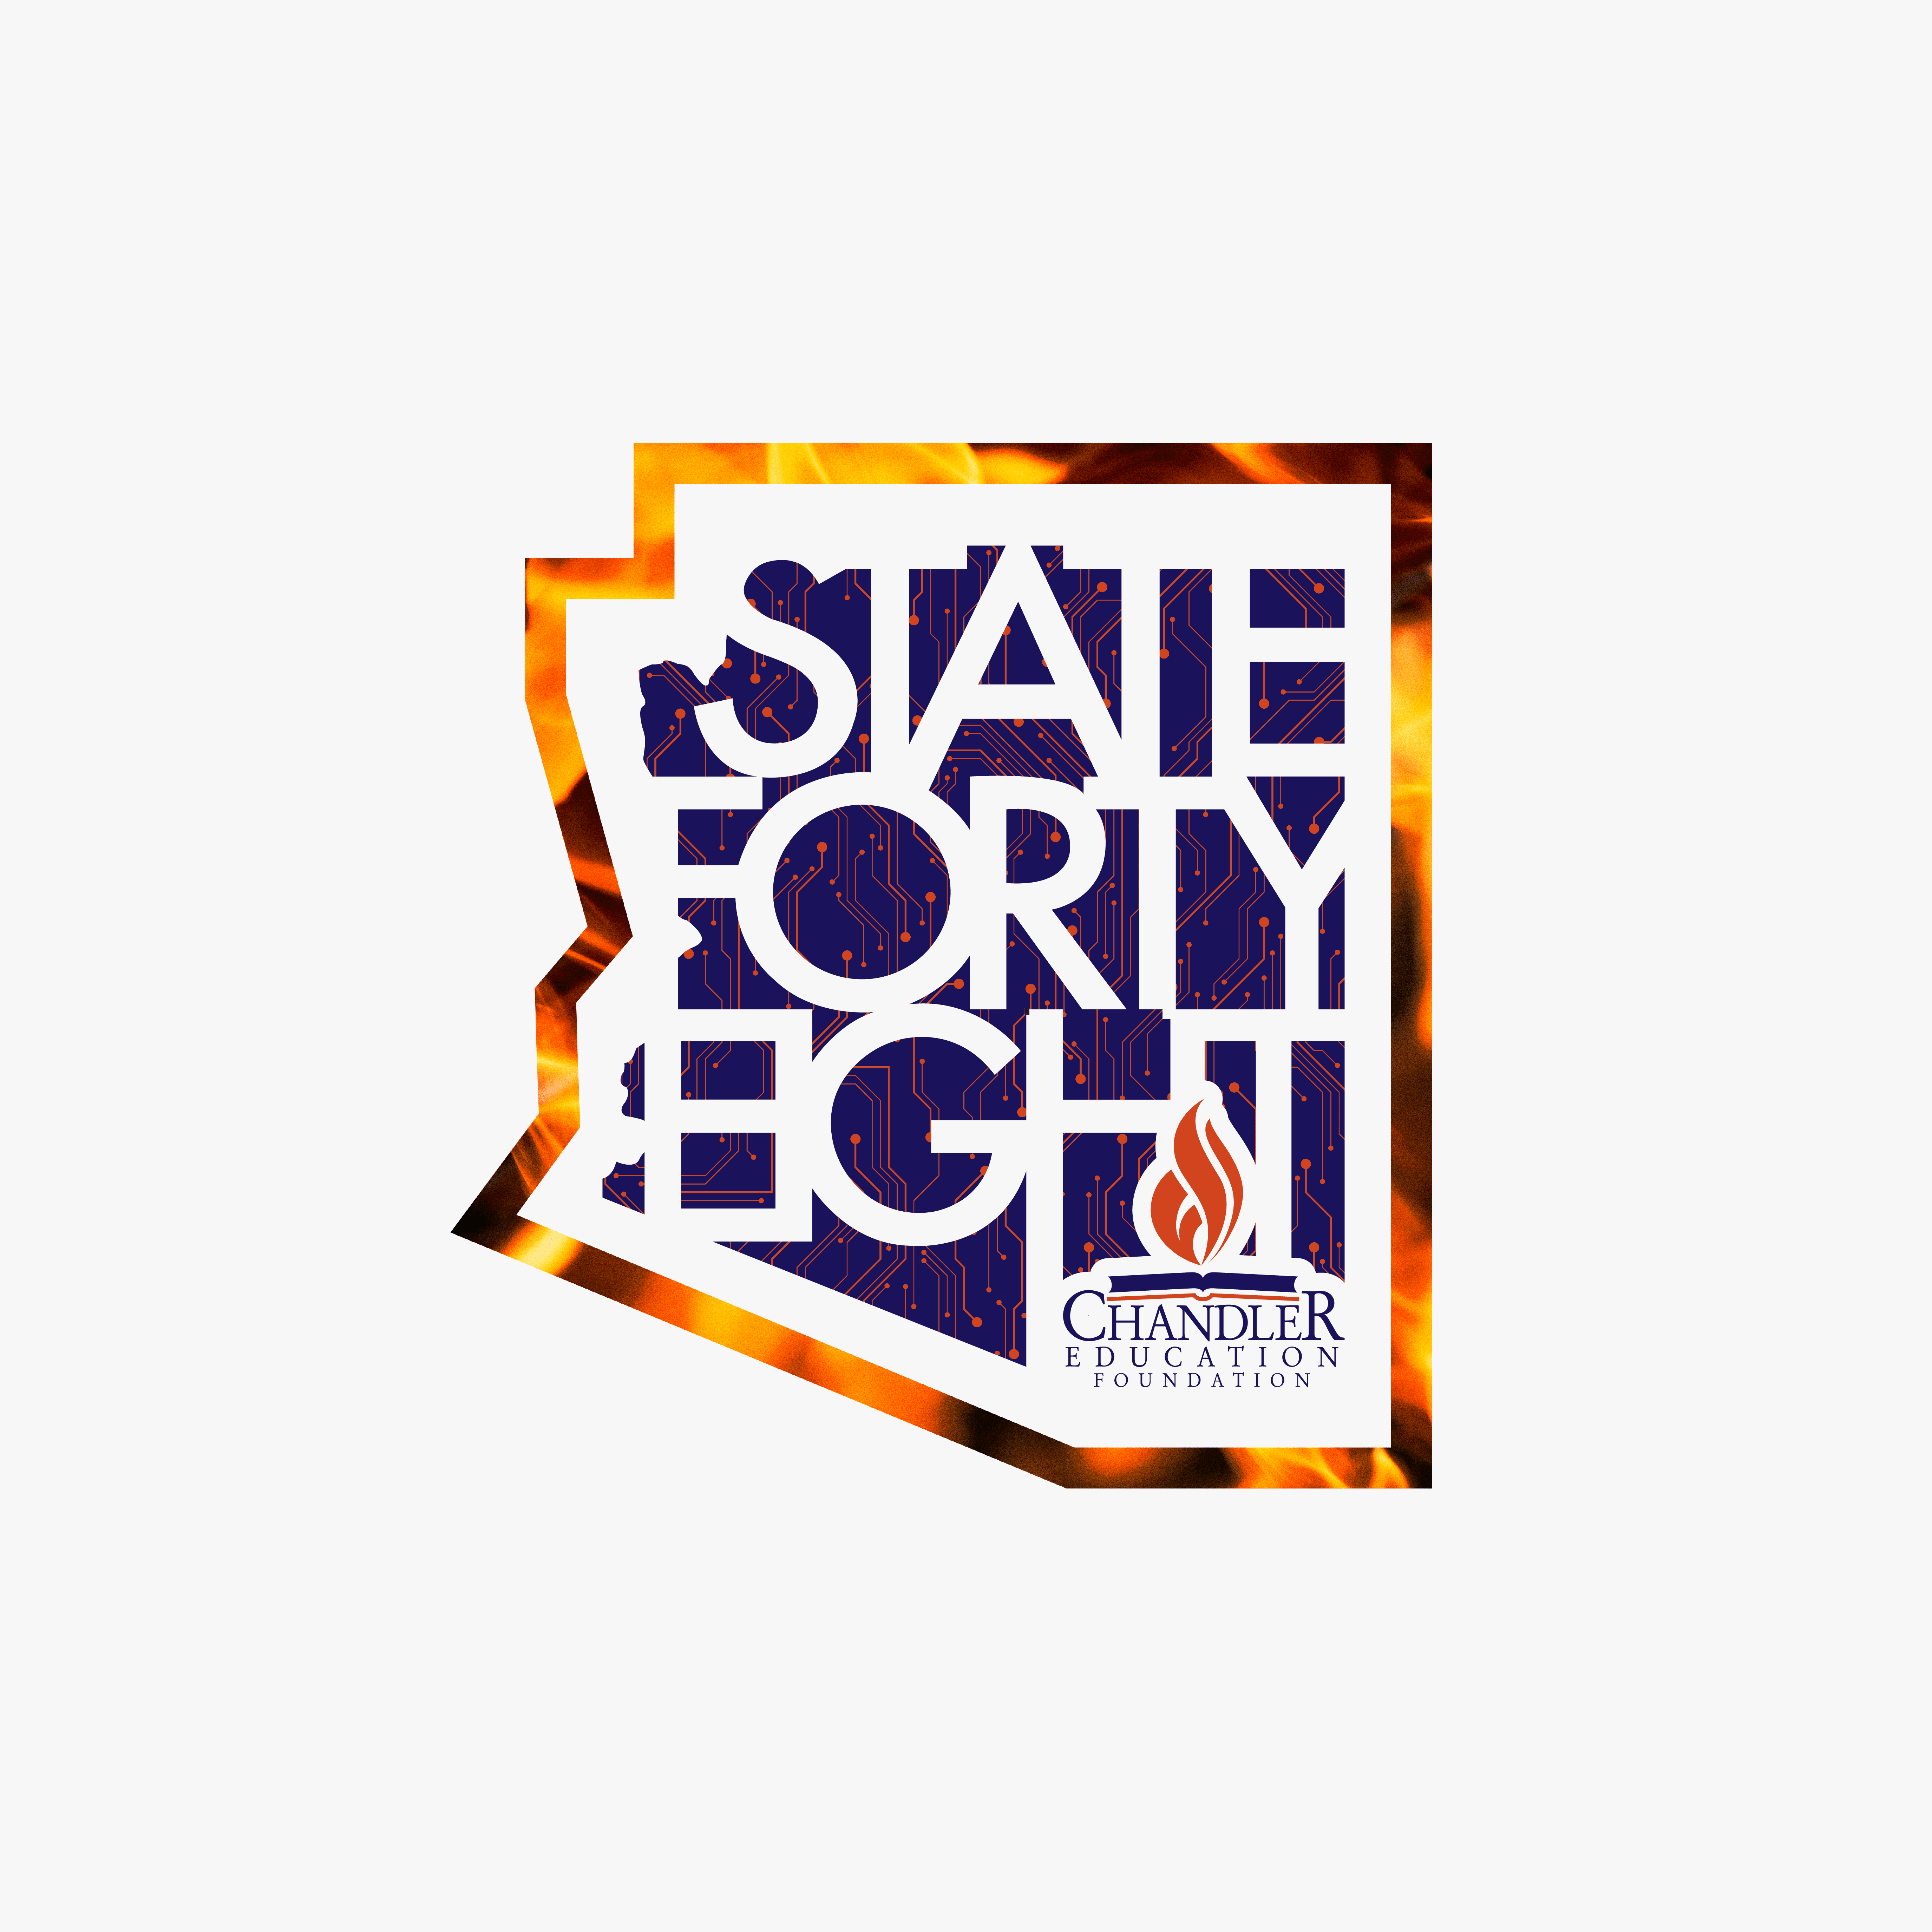 State Forty Eight Image